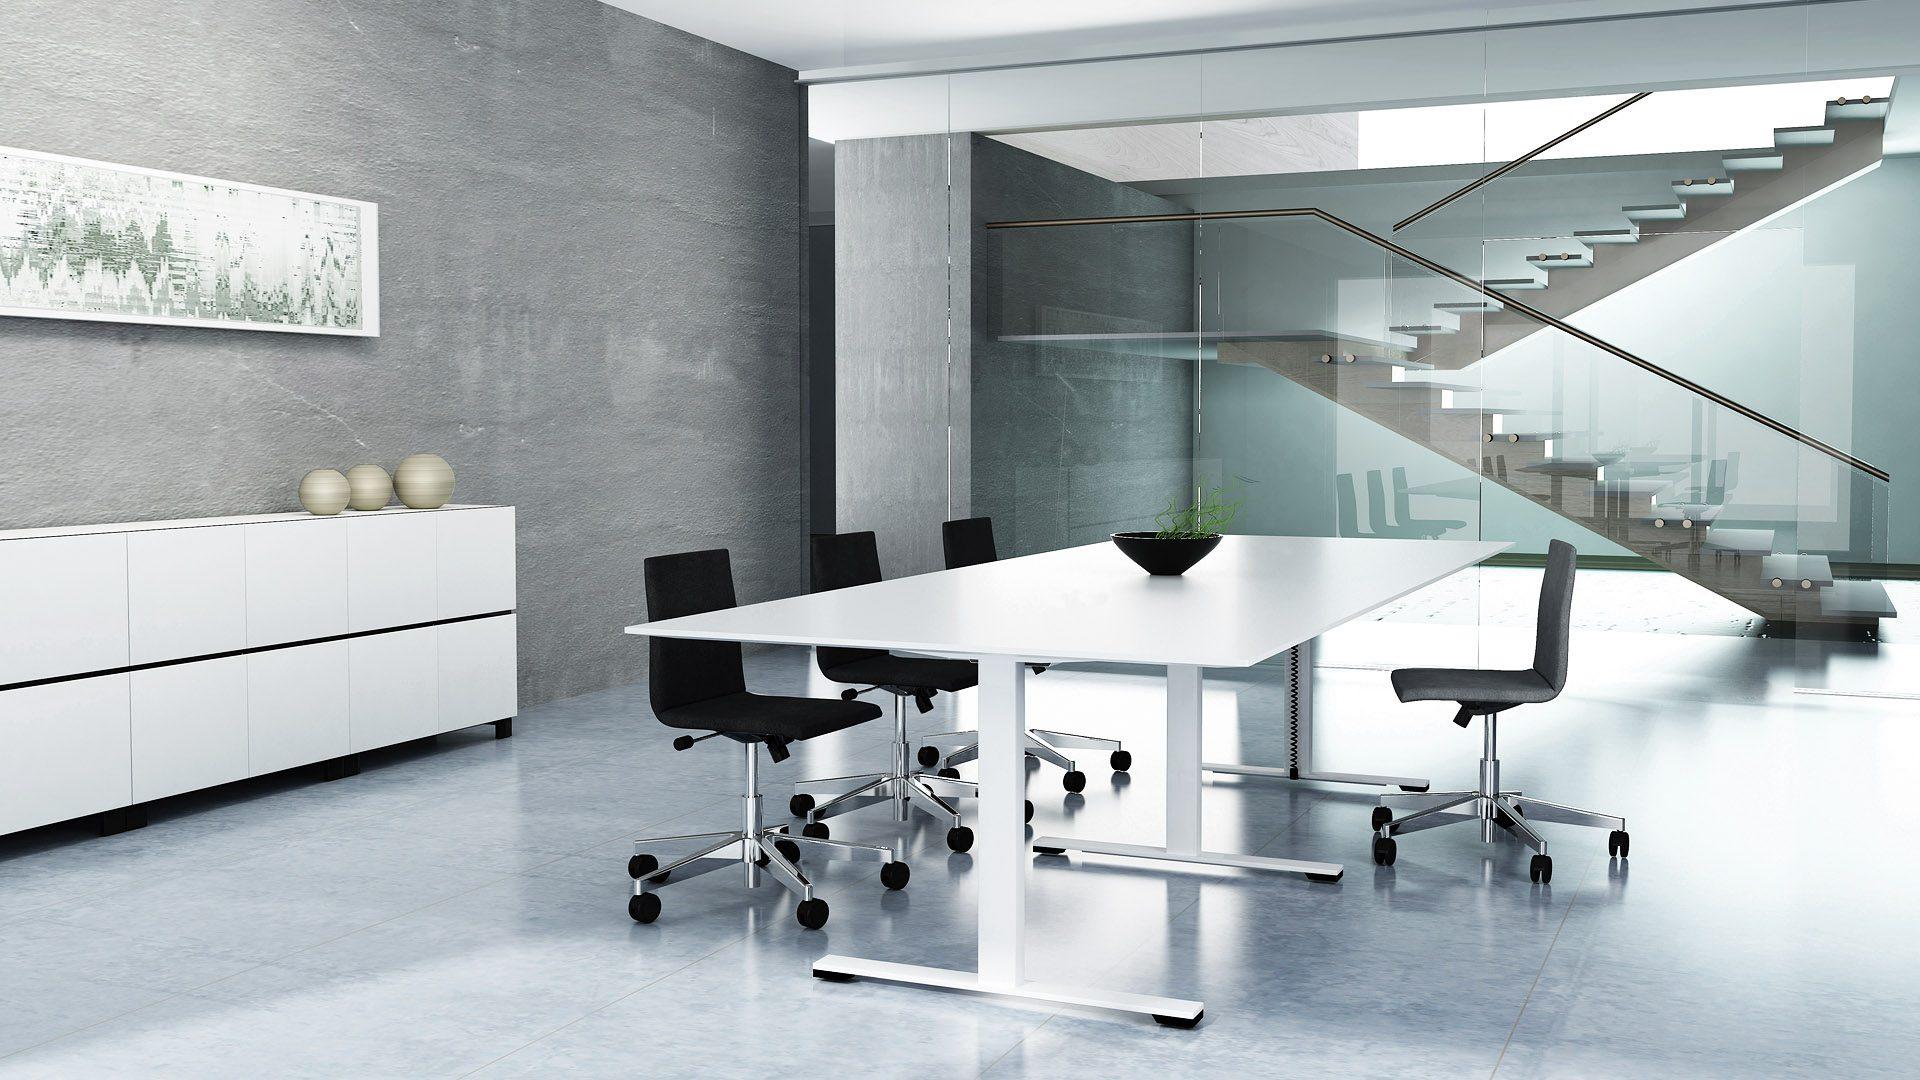 Moon Task Chair used in a meeting room environment